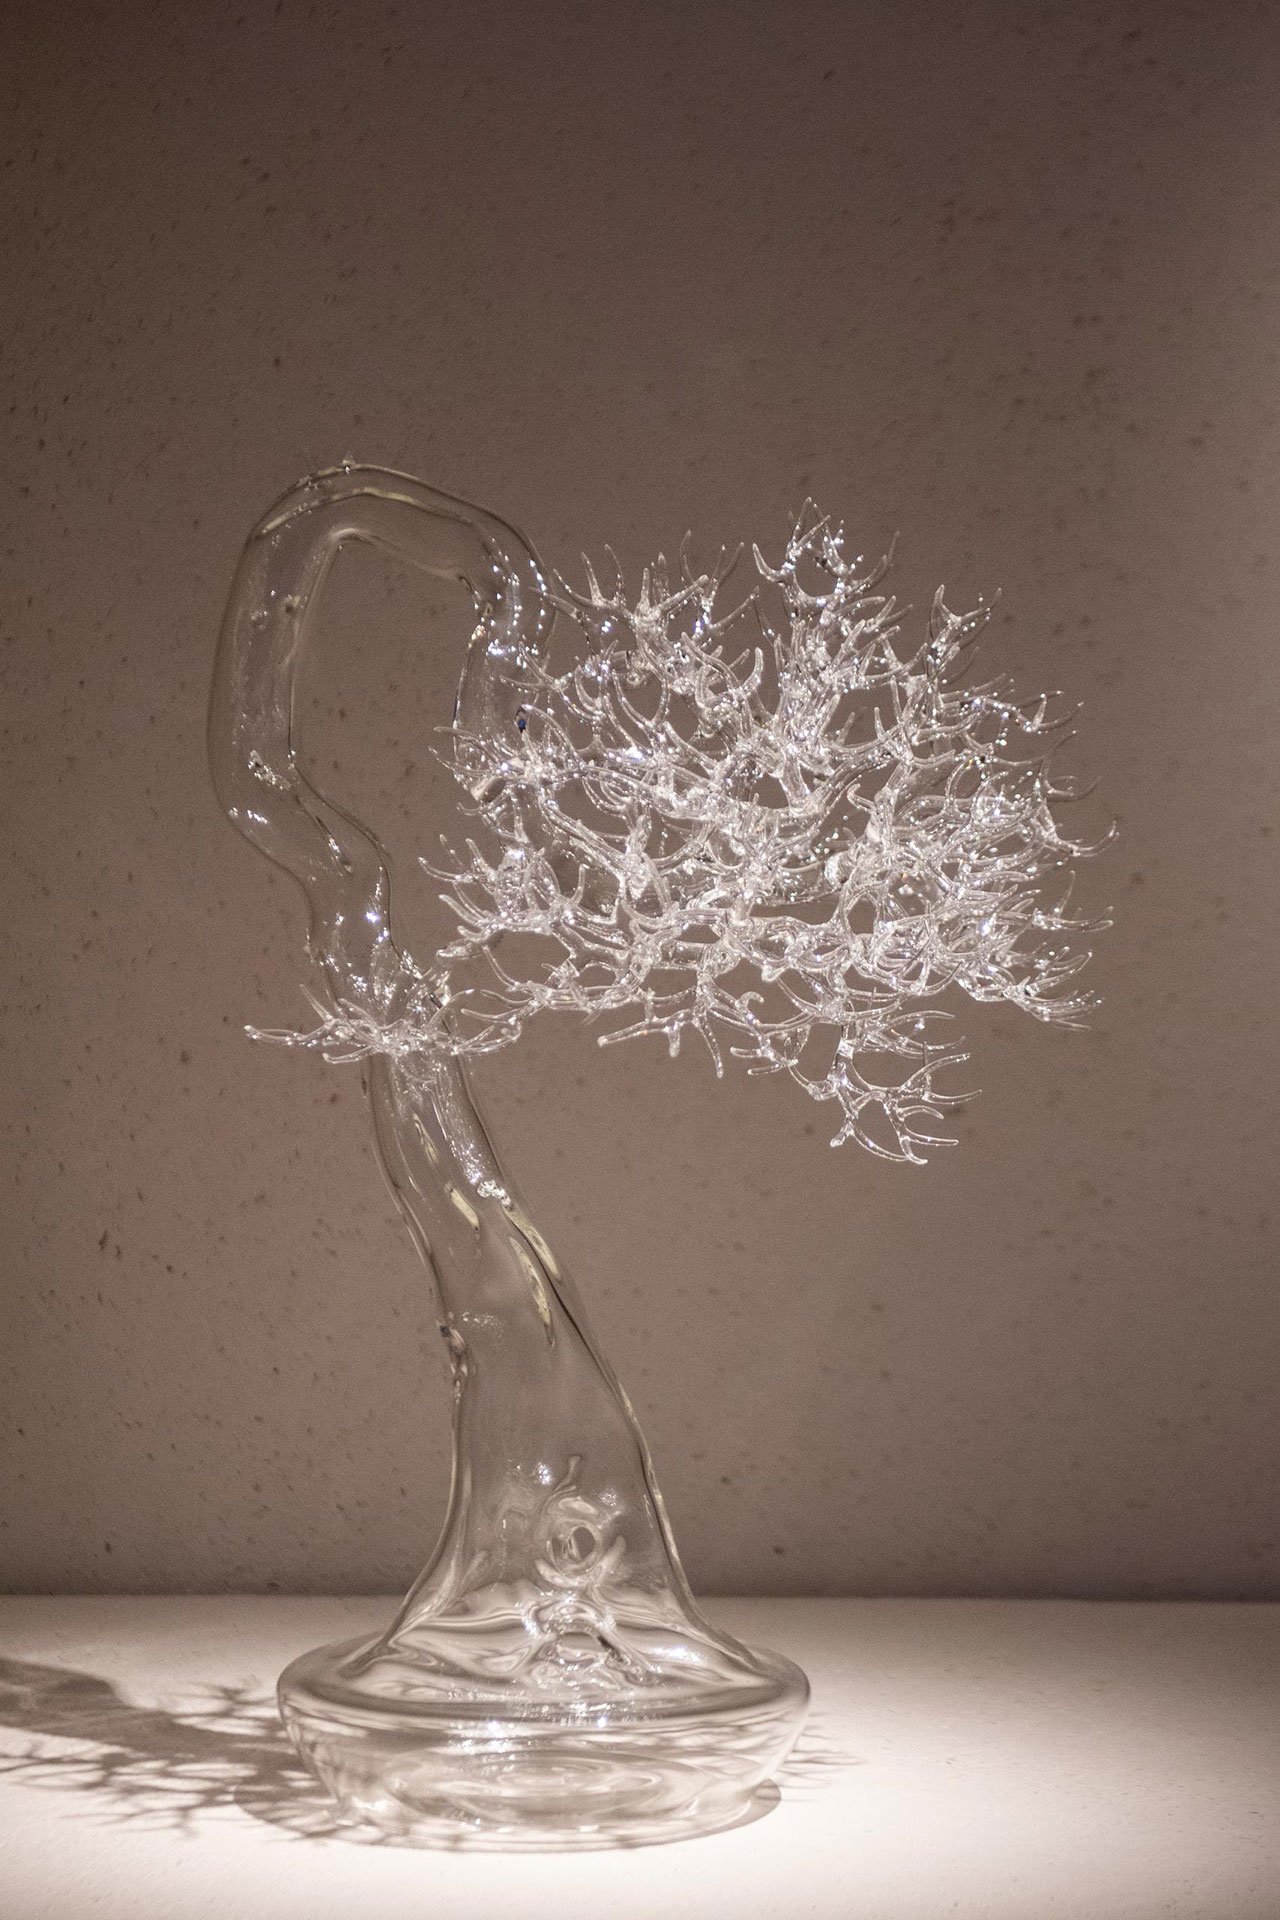 Bonsai in lamp-worked glass by Simone Crestani. "Italy and Japan: Marvellous Liaisons" installation at Homo Faber by Fondazione Cologni dei Mestieri d’Arte. Photography by Simone Padovani © Michelangelo Foundation.